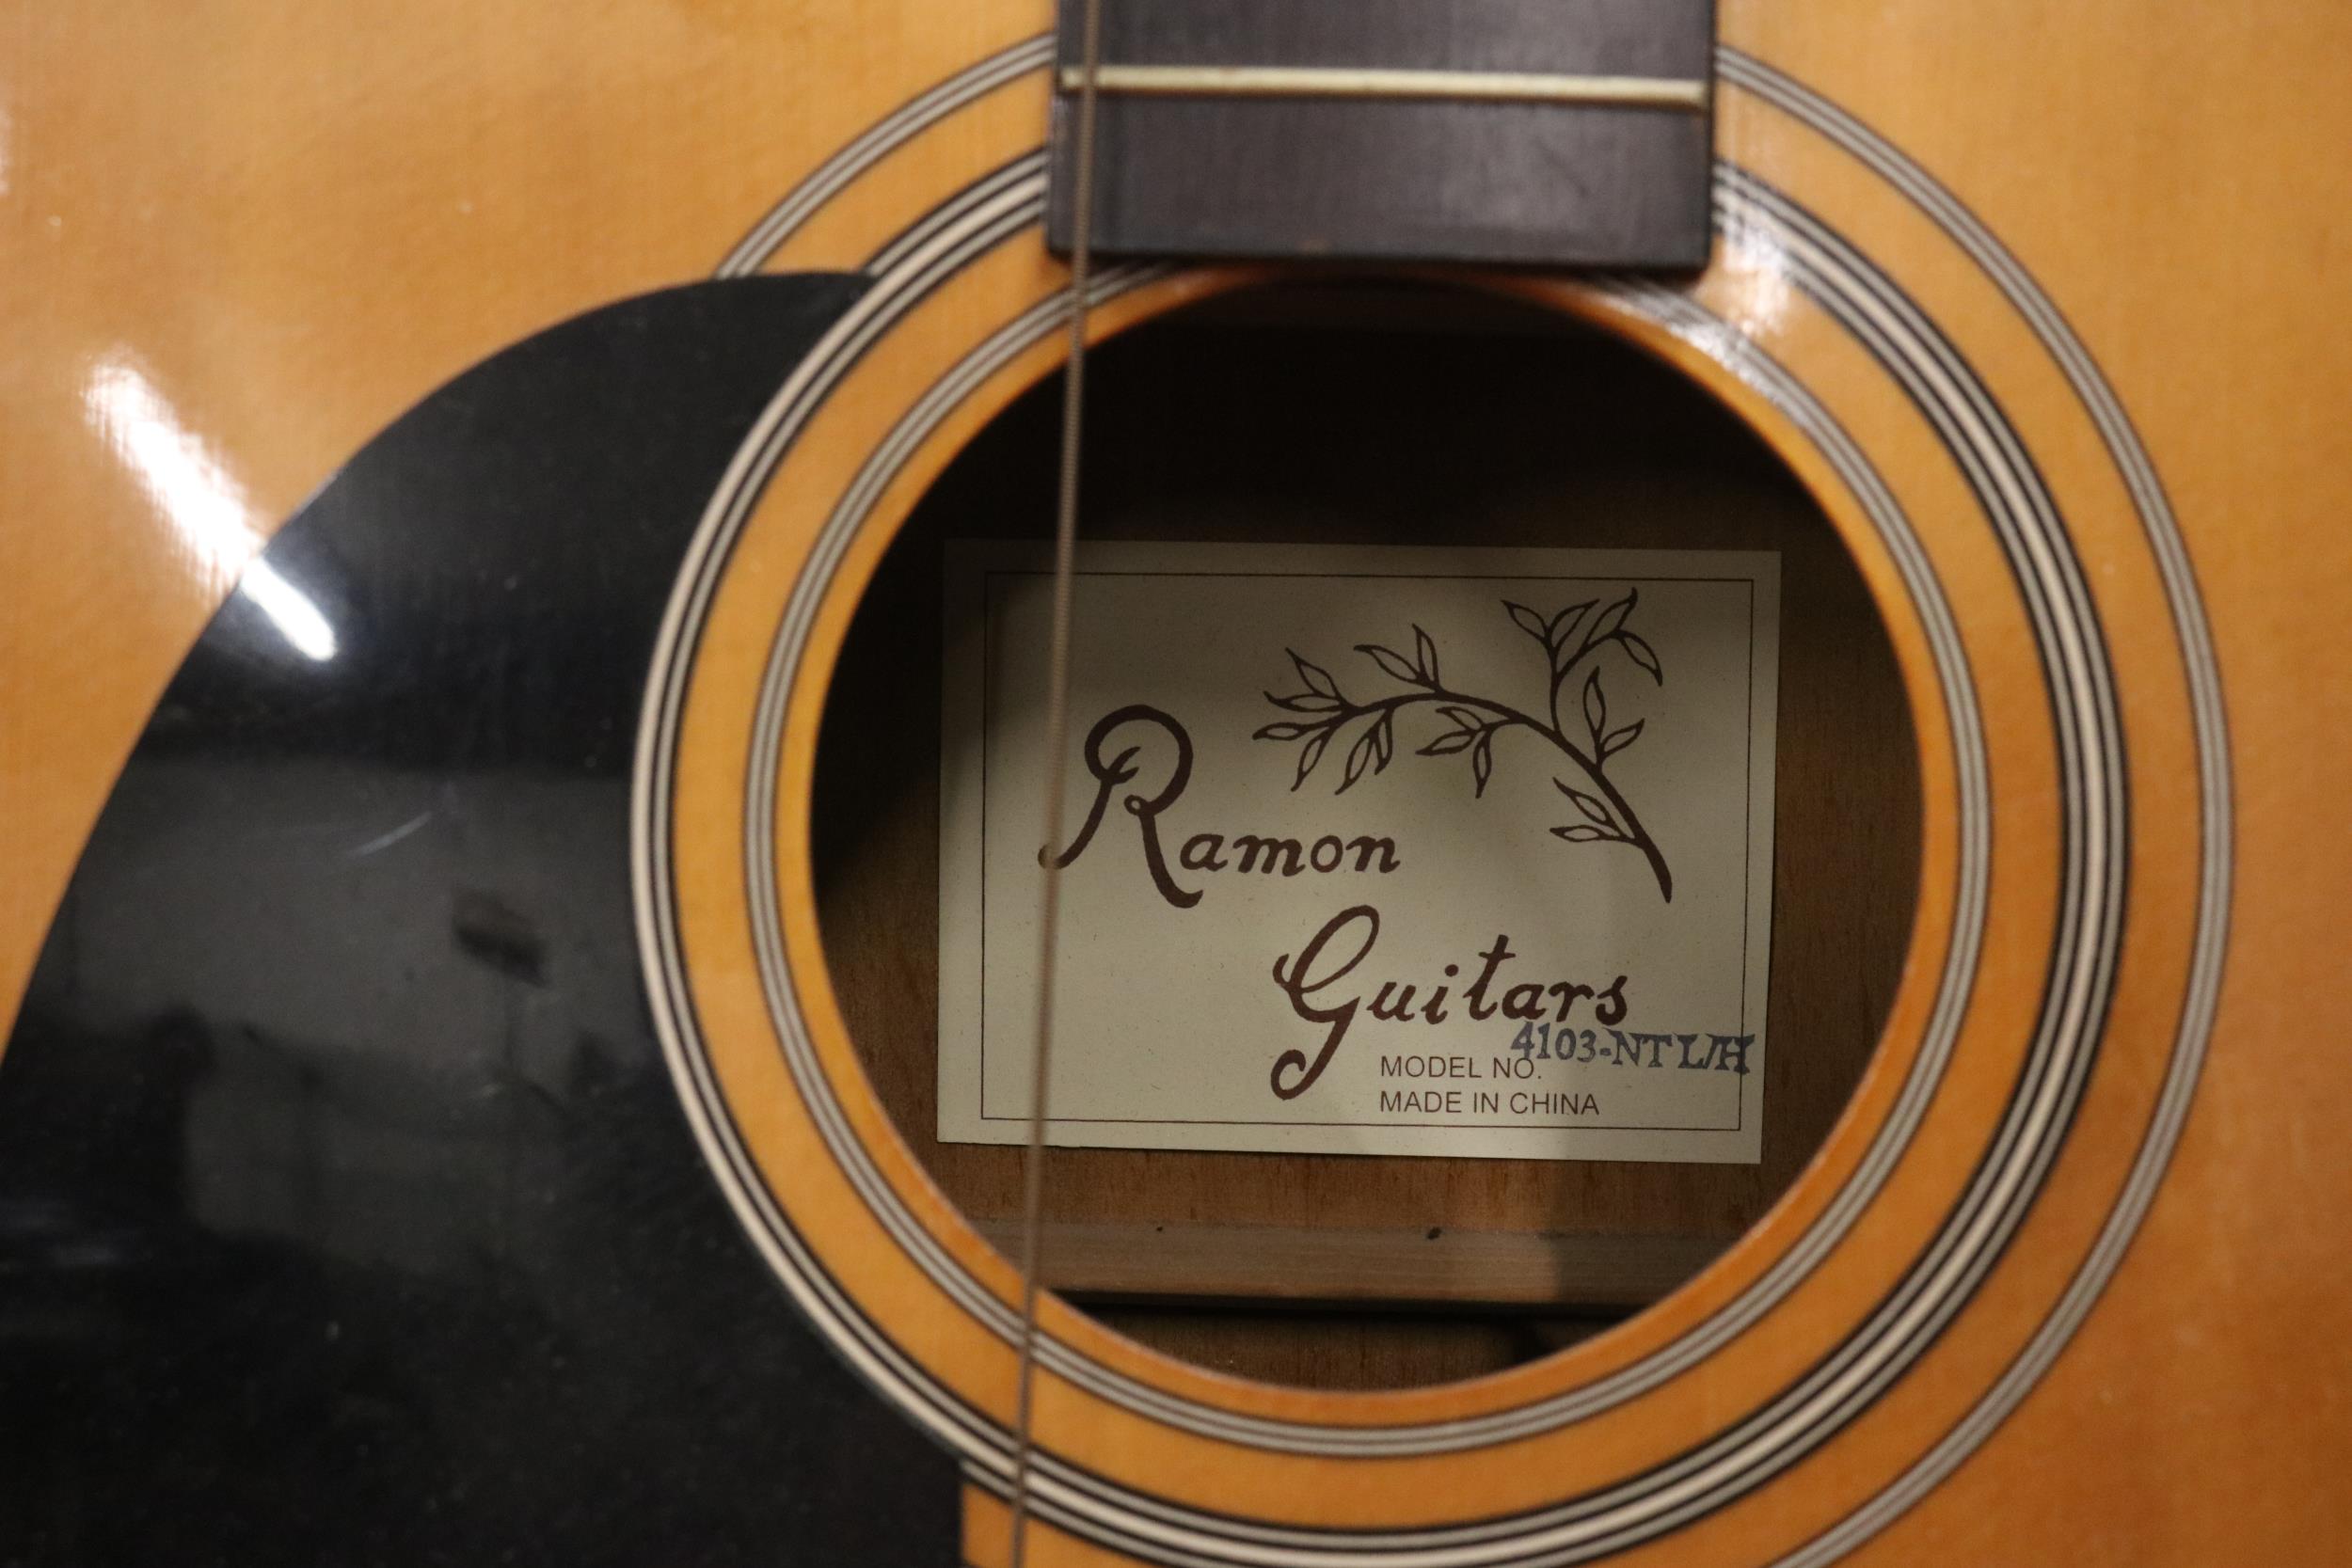 Ramon acoustic Guitar Model Number 4103 - Image 4 of 9